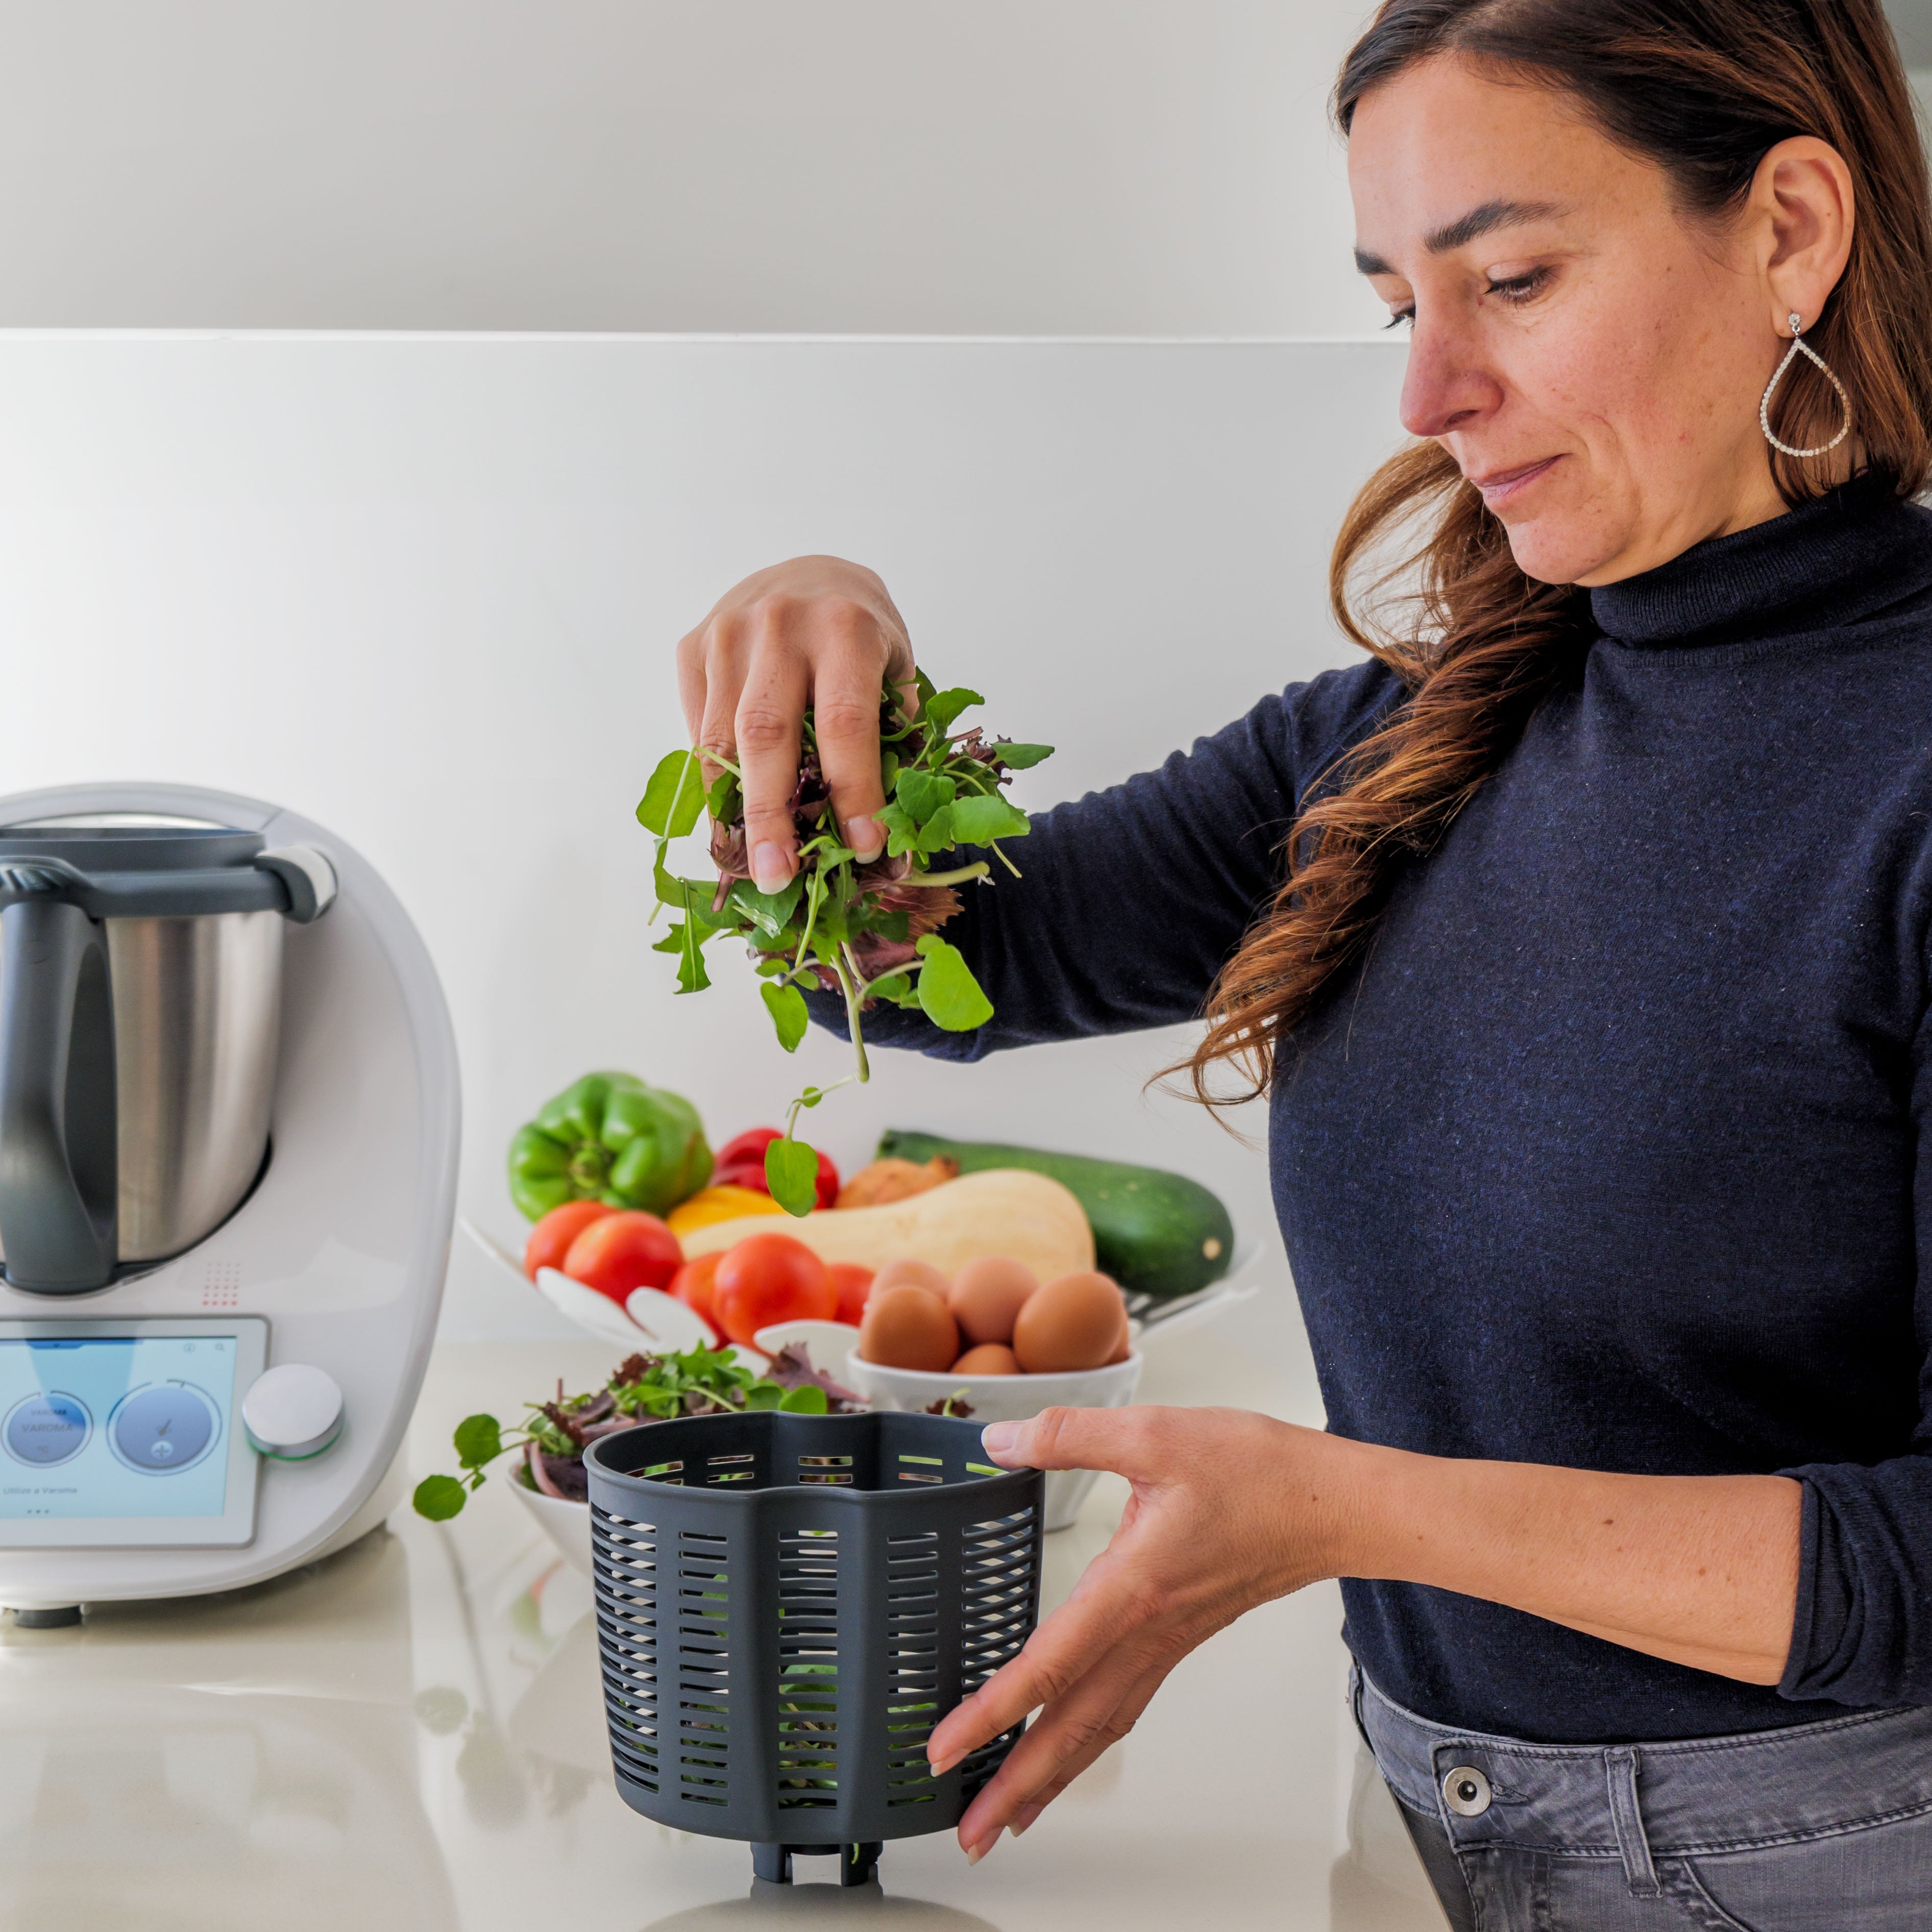 Essorix - Salad Spinner for Thermomix (+ 1 FREE Accessory)